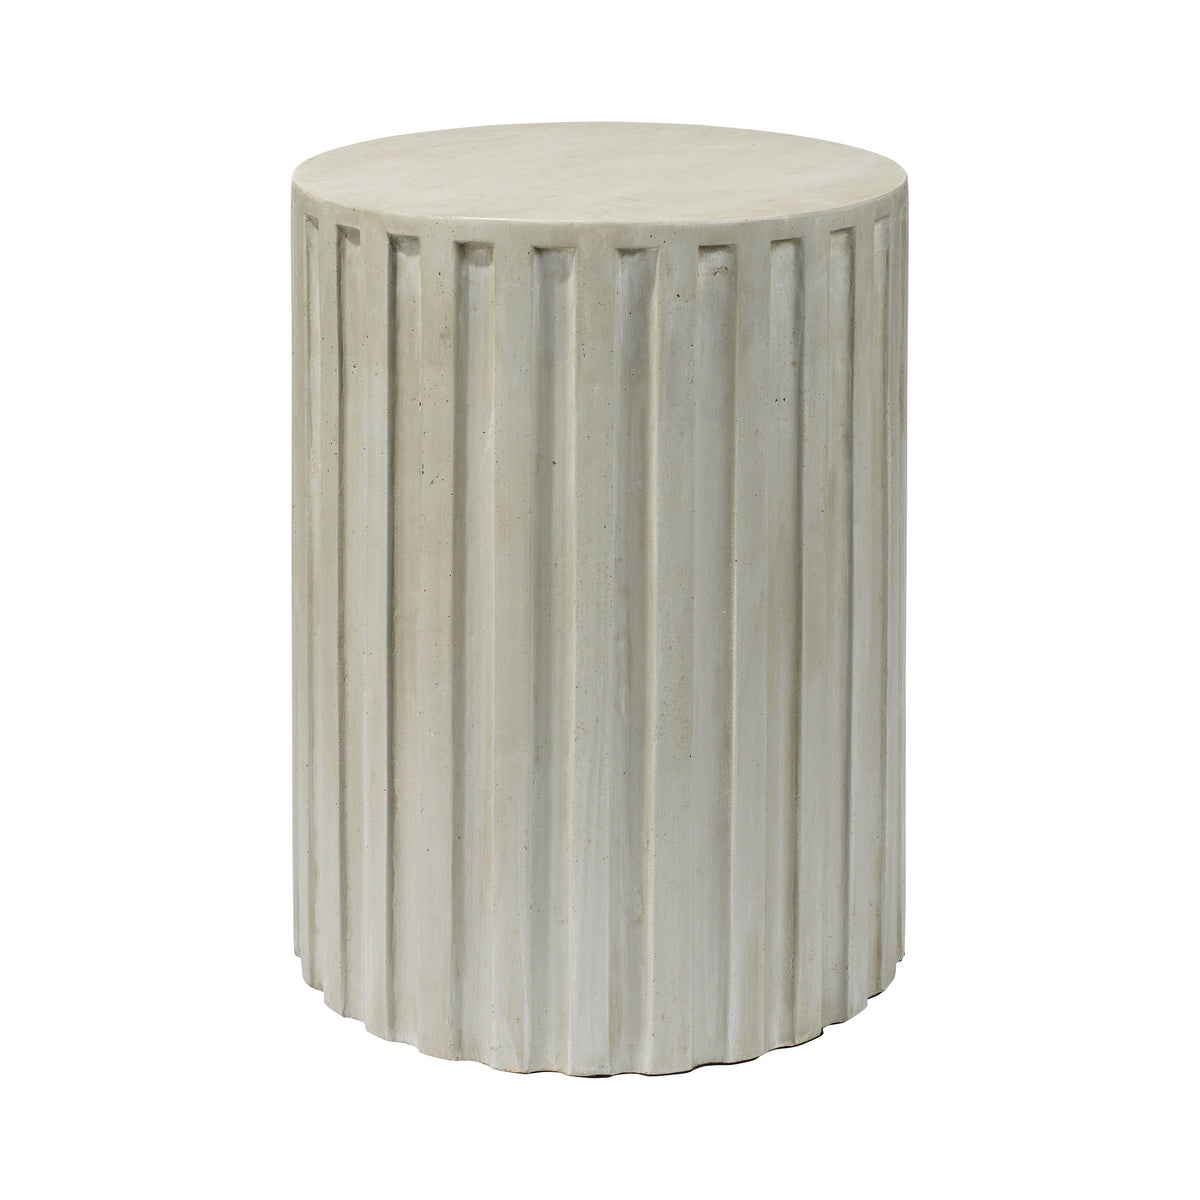 Jamie Young Company - 20FLUT-STGR - Fluted Column Side Table - Fluted - Grey